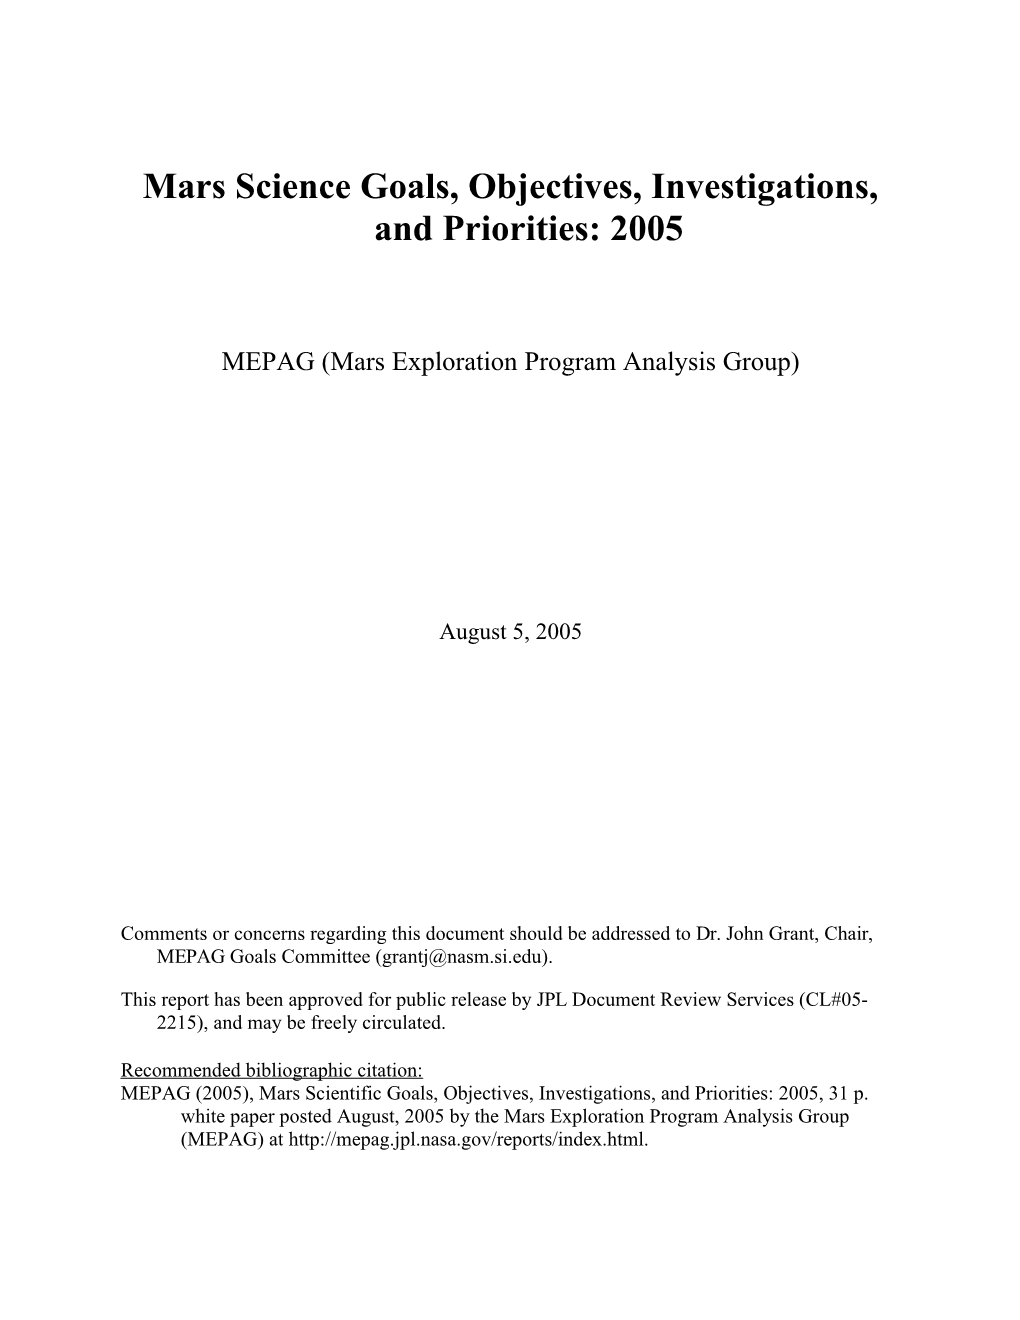 MEPAG Goals, Objectives, Investigations, and Priorities: 2005